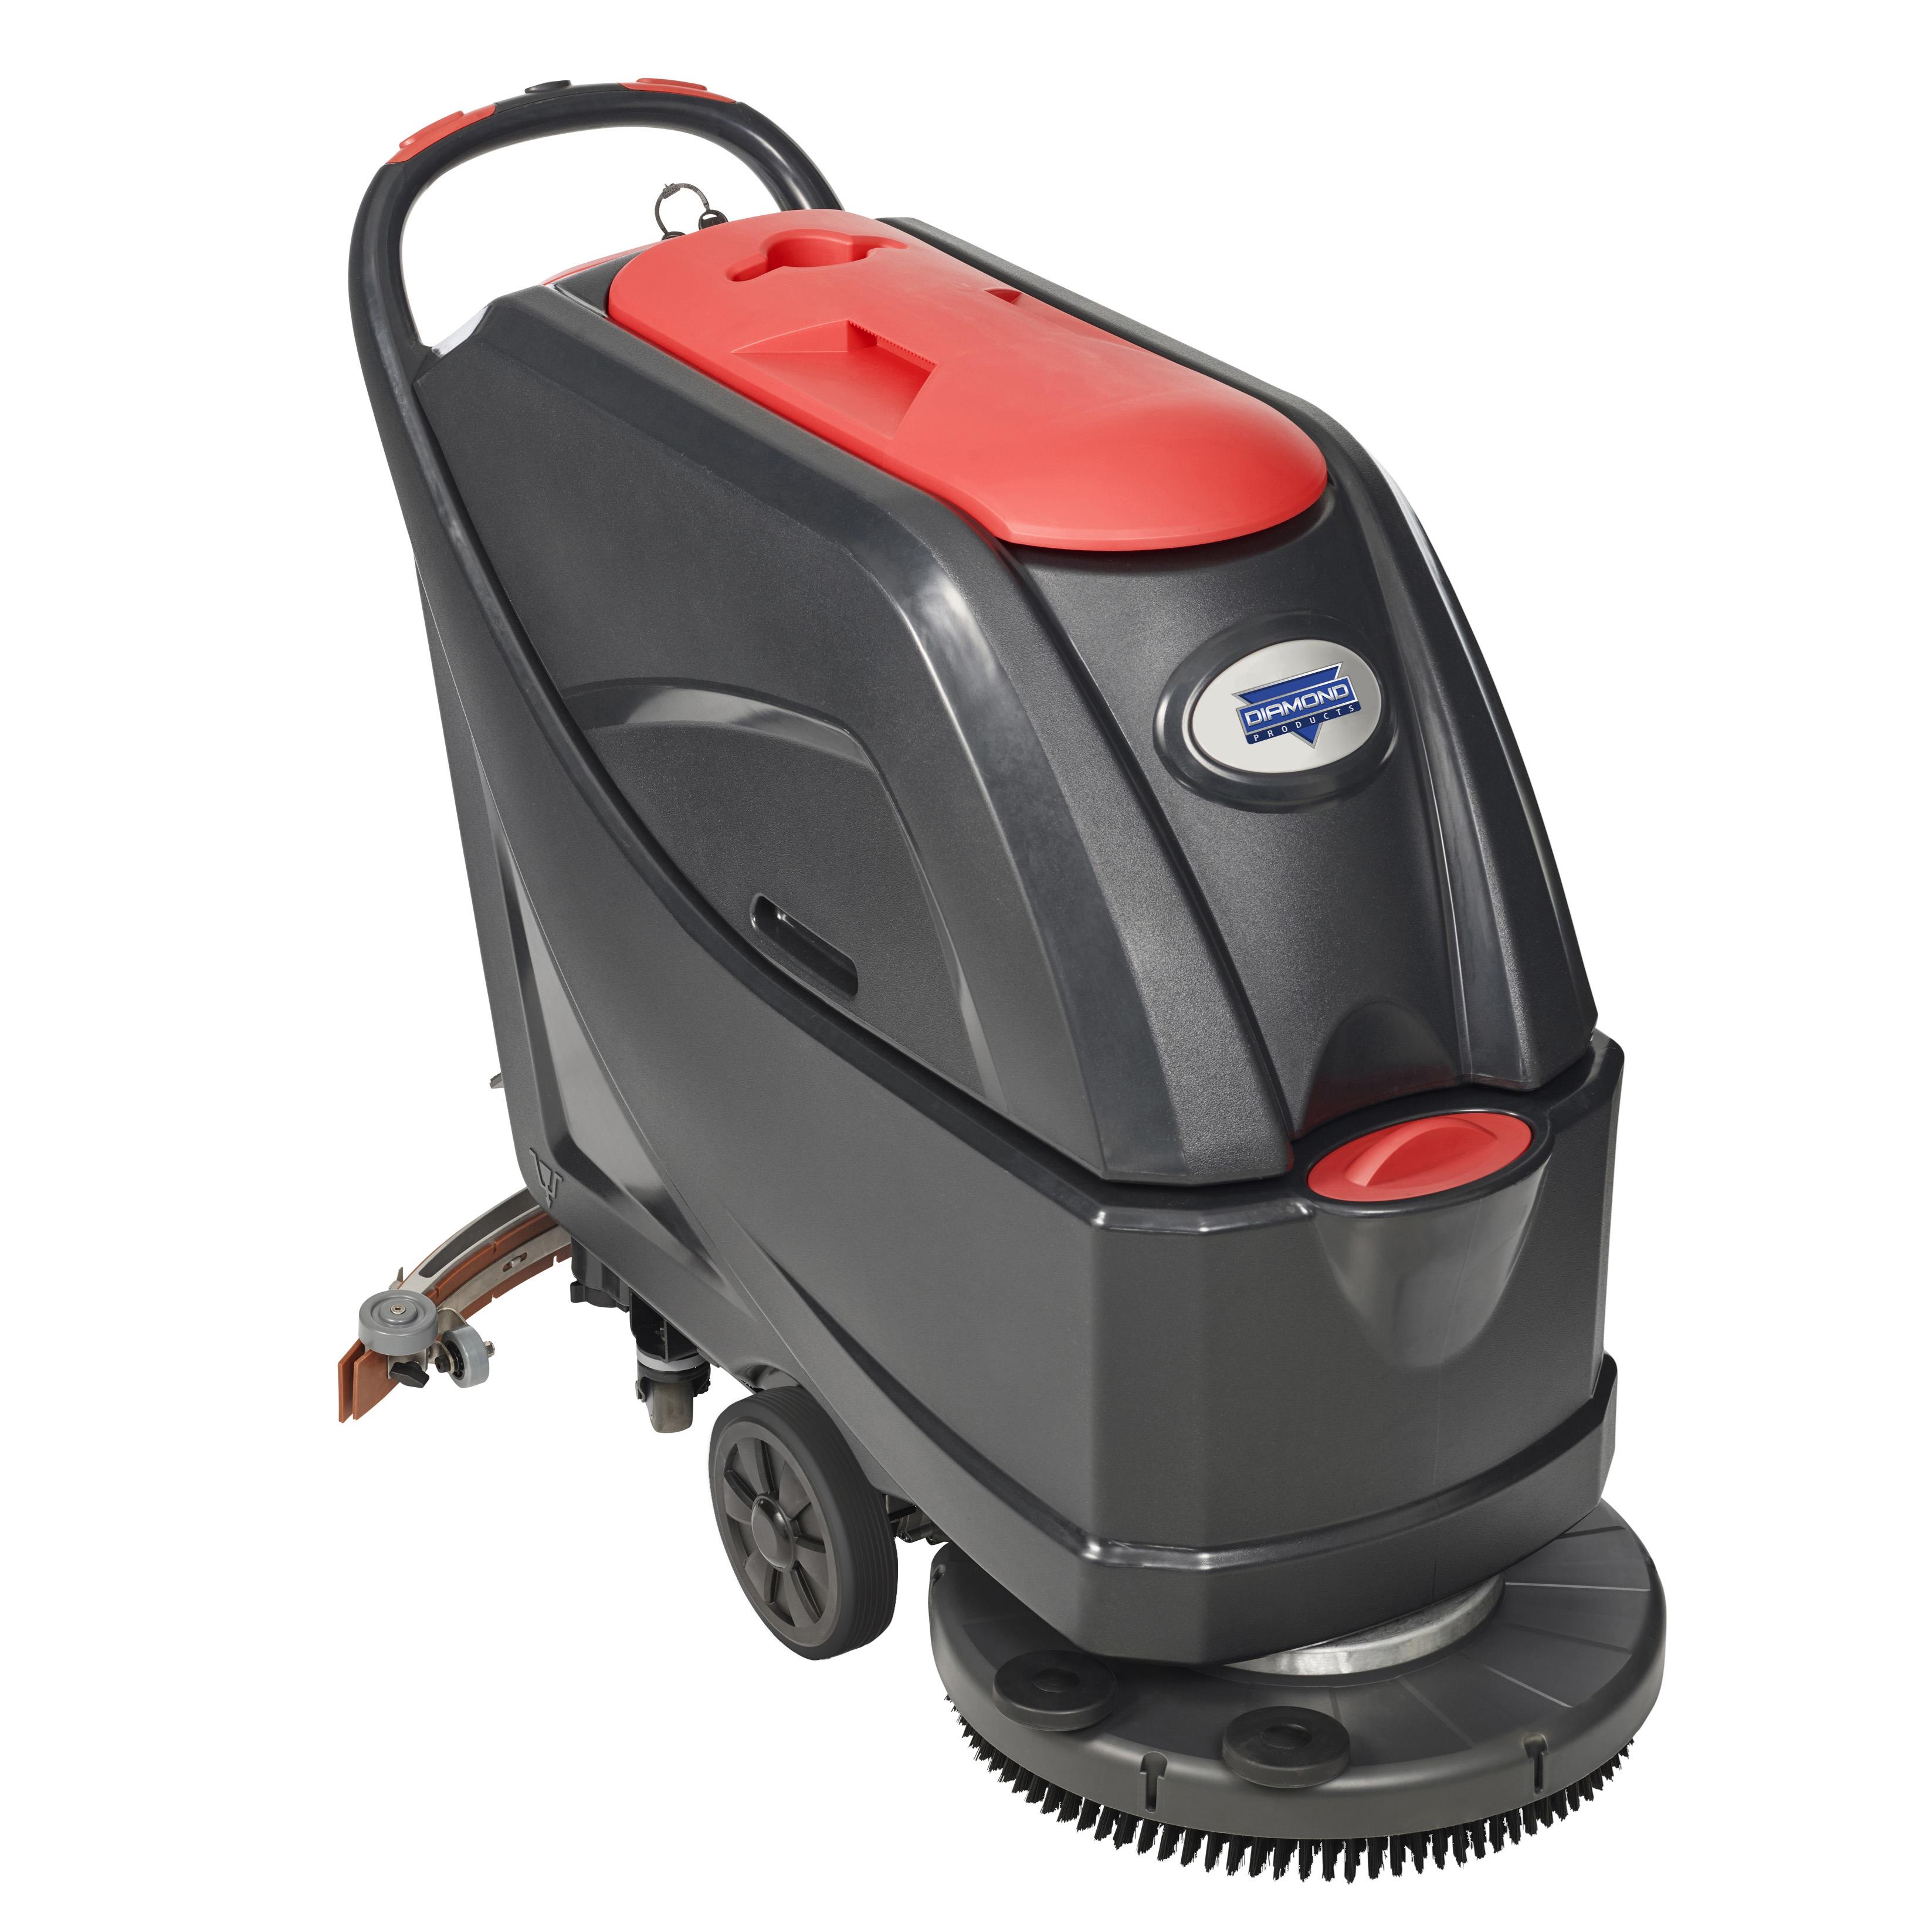 Walk-Behind Scrubbers - Commercial Cleaning Equipment